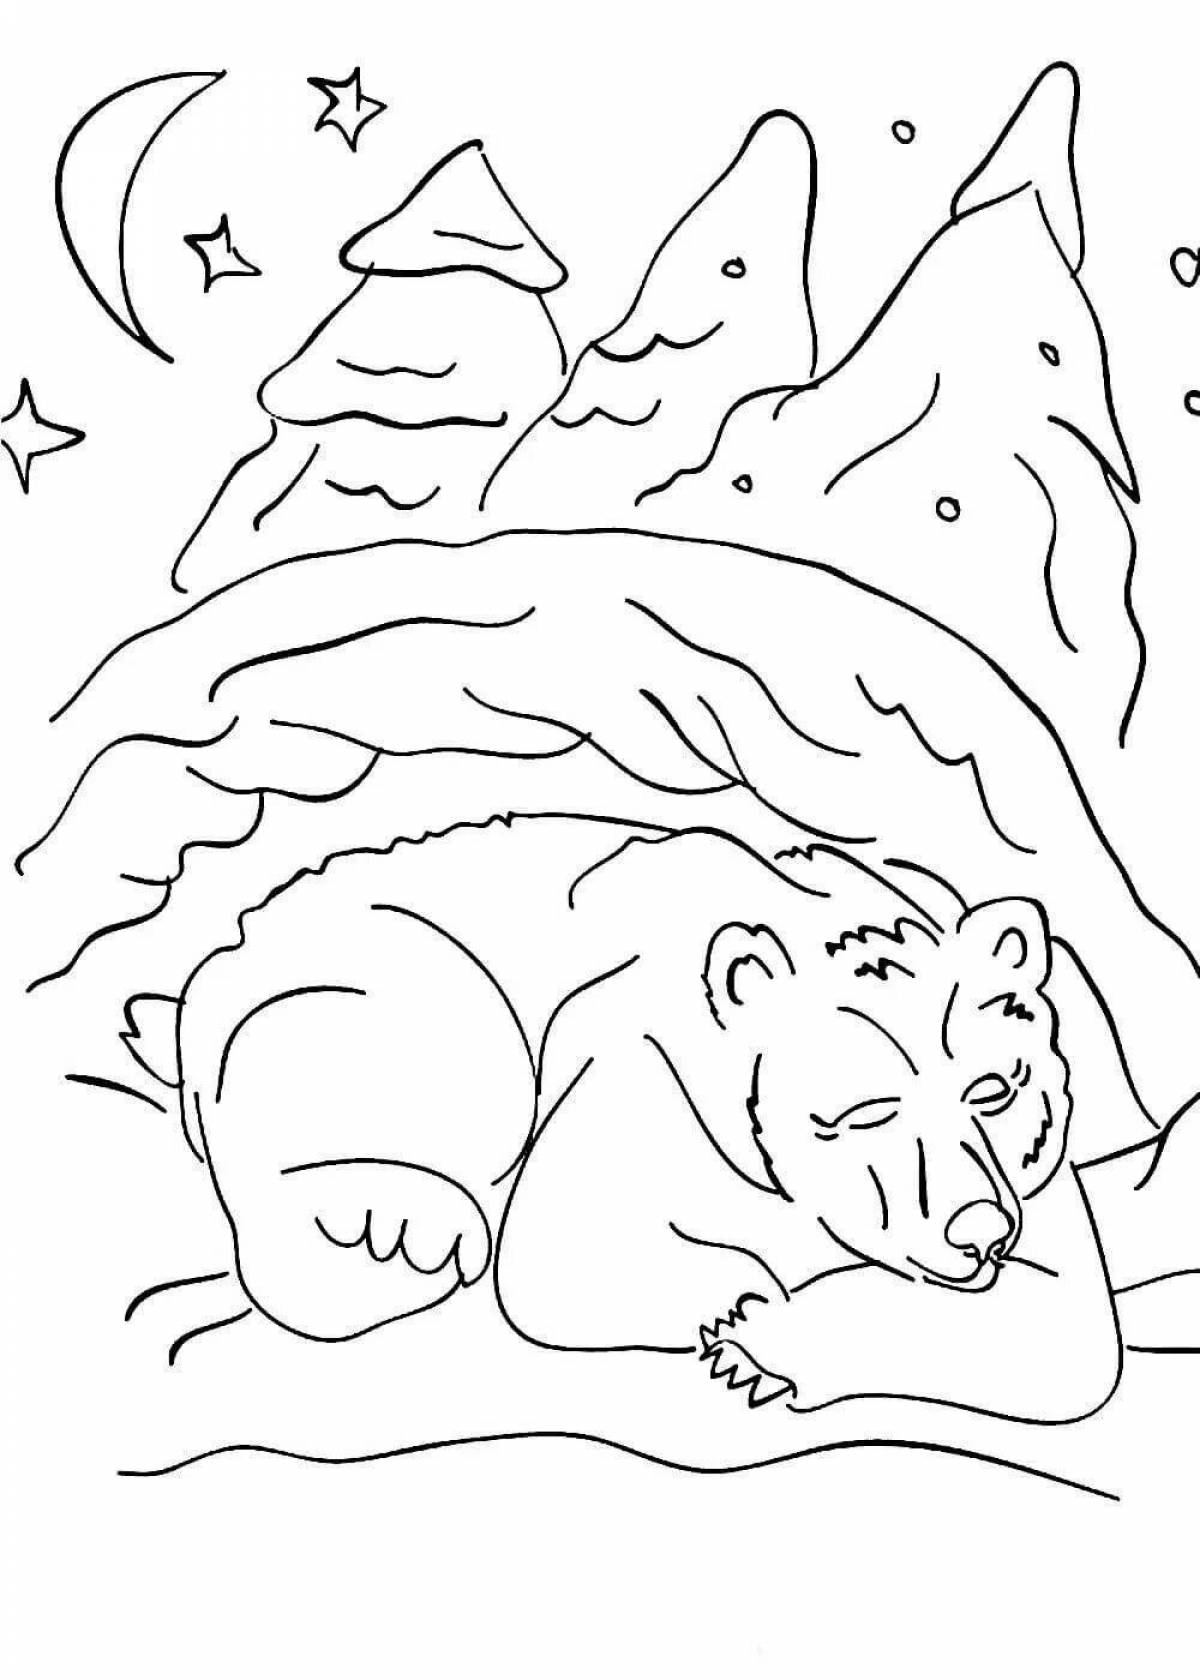 Drowsy bear sleeps in a den coloring page